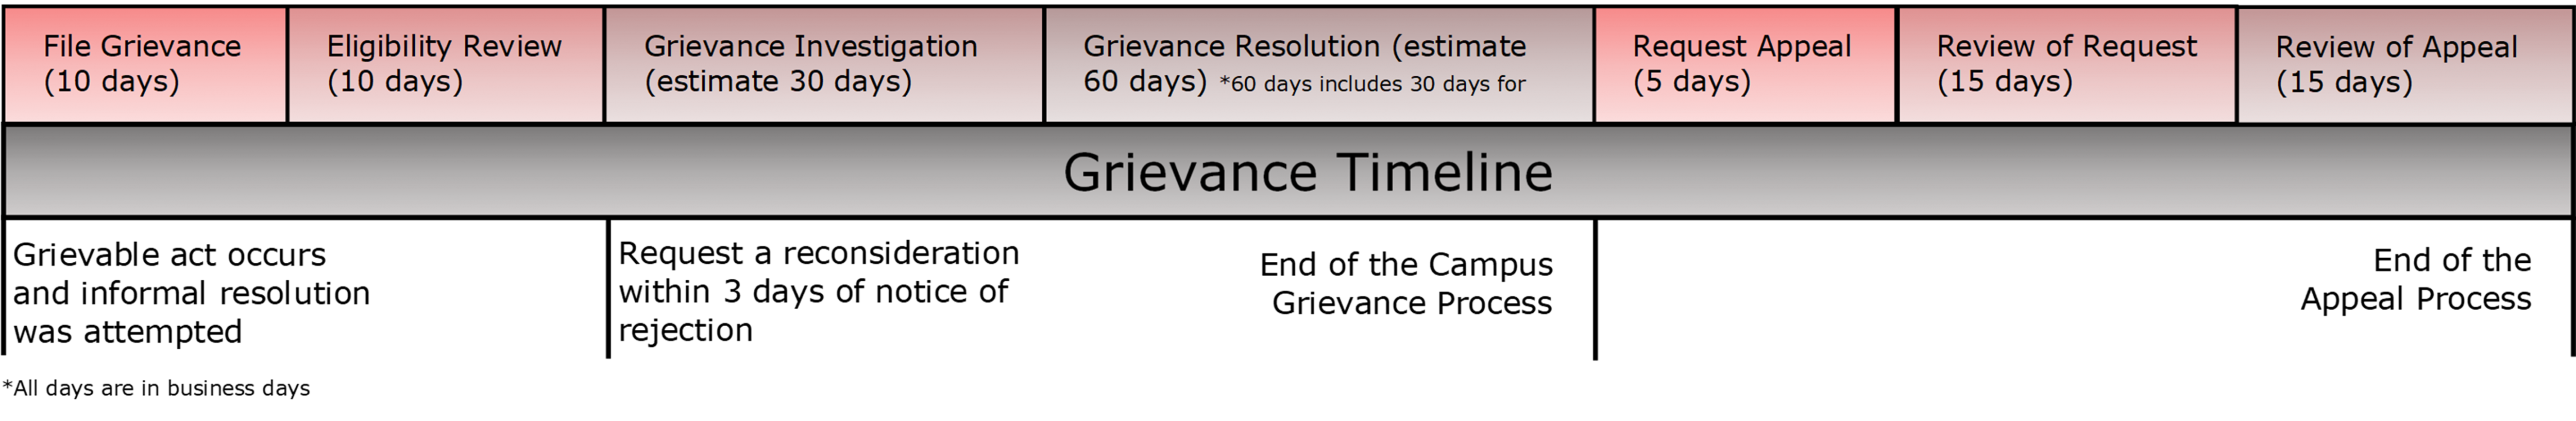 Grievance timeline graphic; please contact the HR Service Center for assistance (573) 882-2146 or HRServiceCenter@umsystem.edu. File grievance (10 days); Eligibility review (10 days);[Request a reconsideration within 3 days of notice of rejection]; Grievance investigation (estimate 30 days); Grievance resolution (estimate 60 days) Request appeal(5 days); Review of request (15 days); Review of appeal (15 days). All days are in business days.